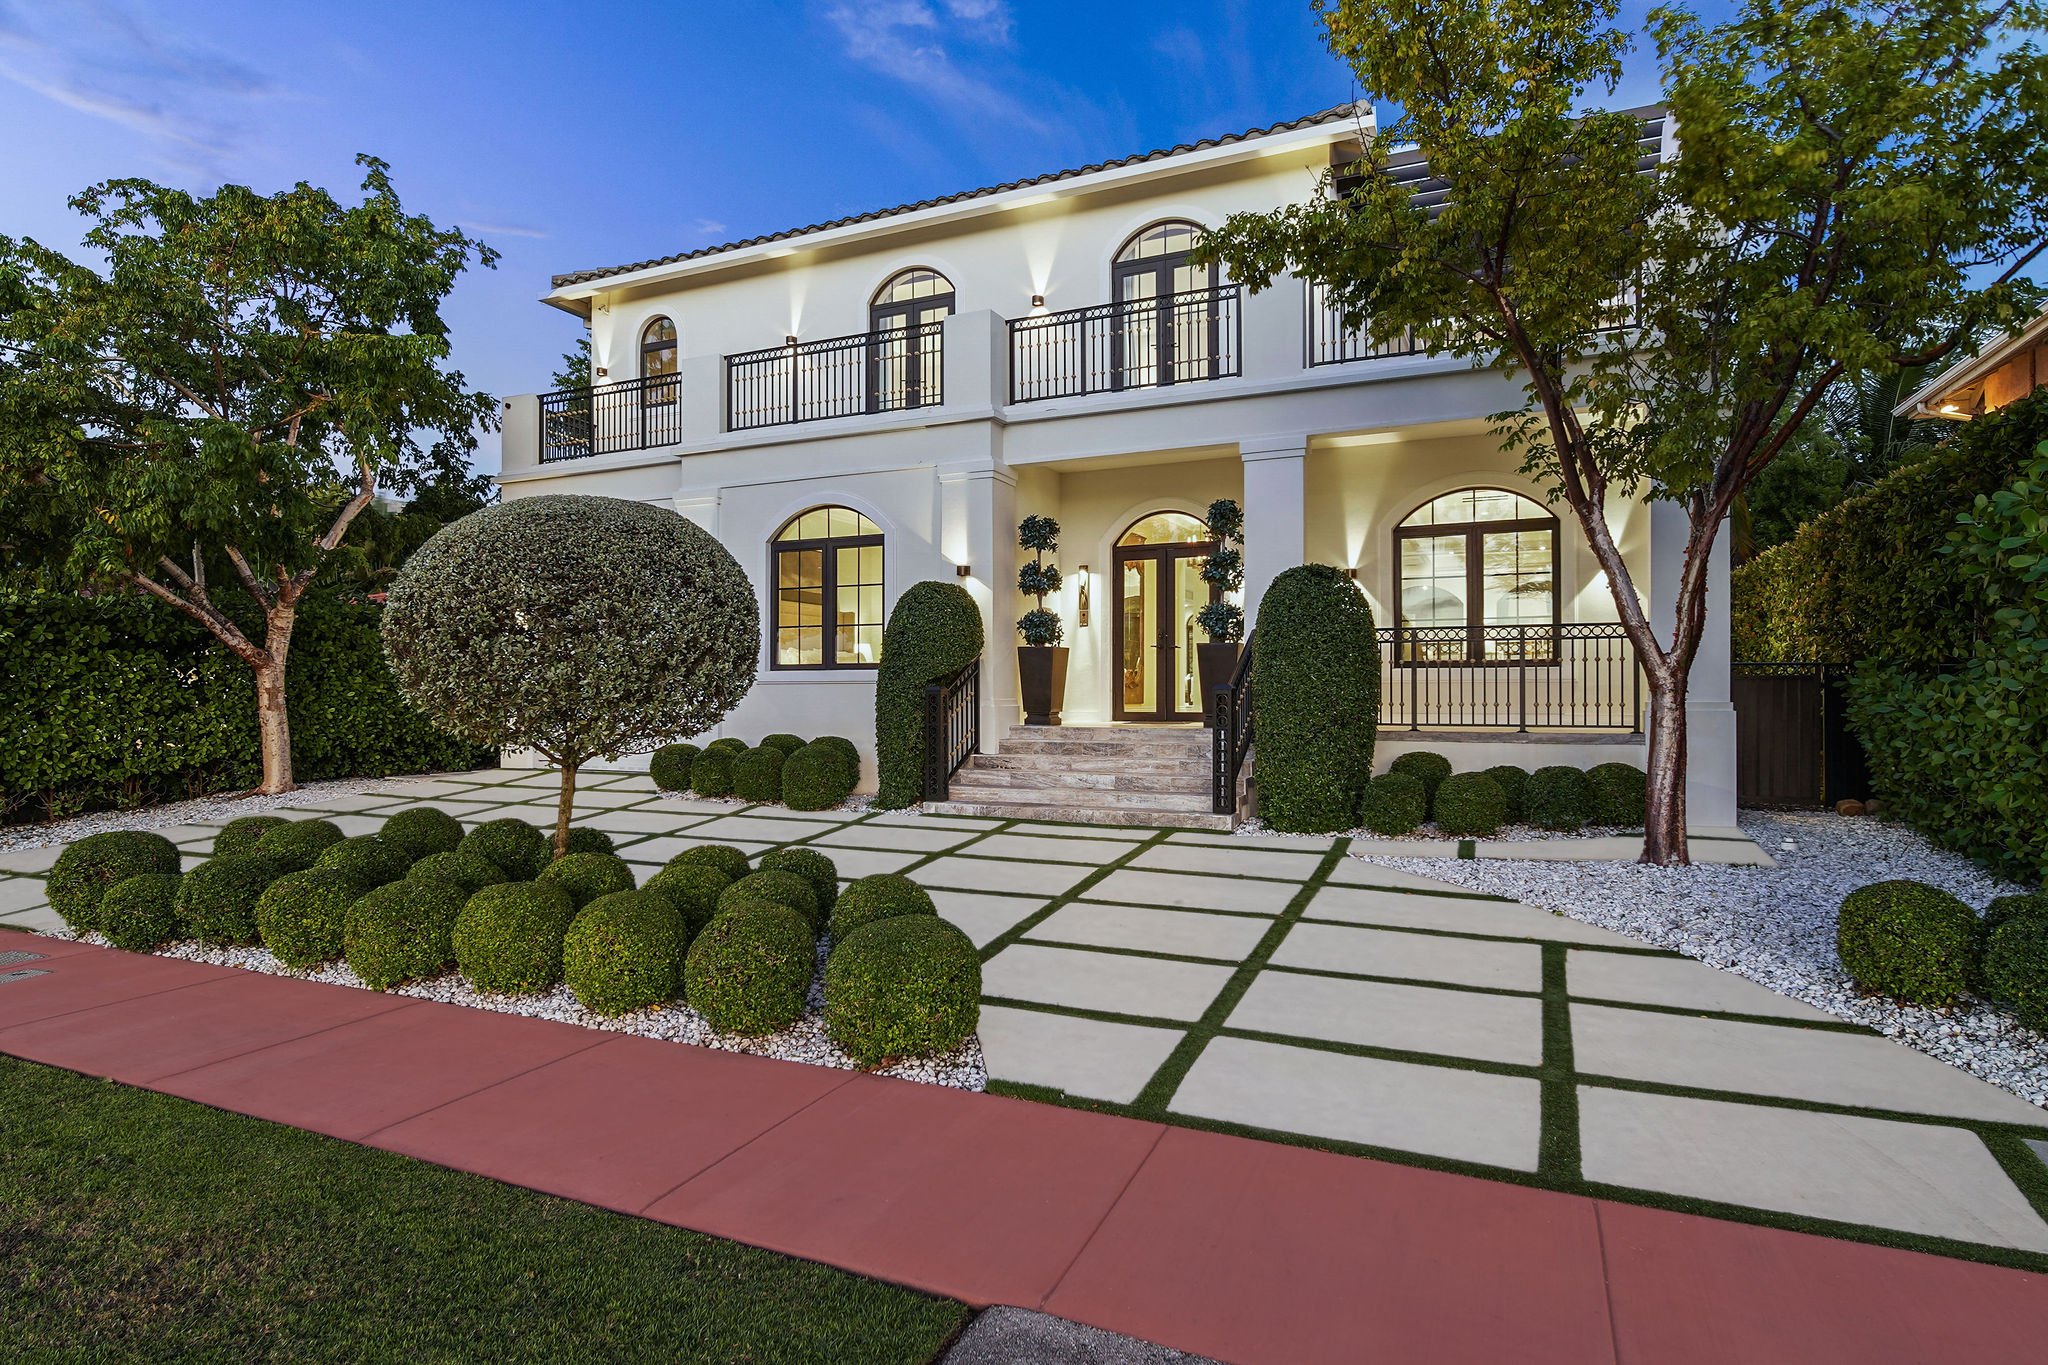 Non-Waterfront Home On Miami Beach Golf Course Sells For $9.5 Million 2.jpg